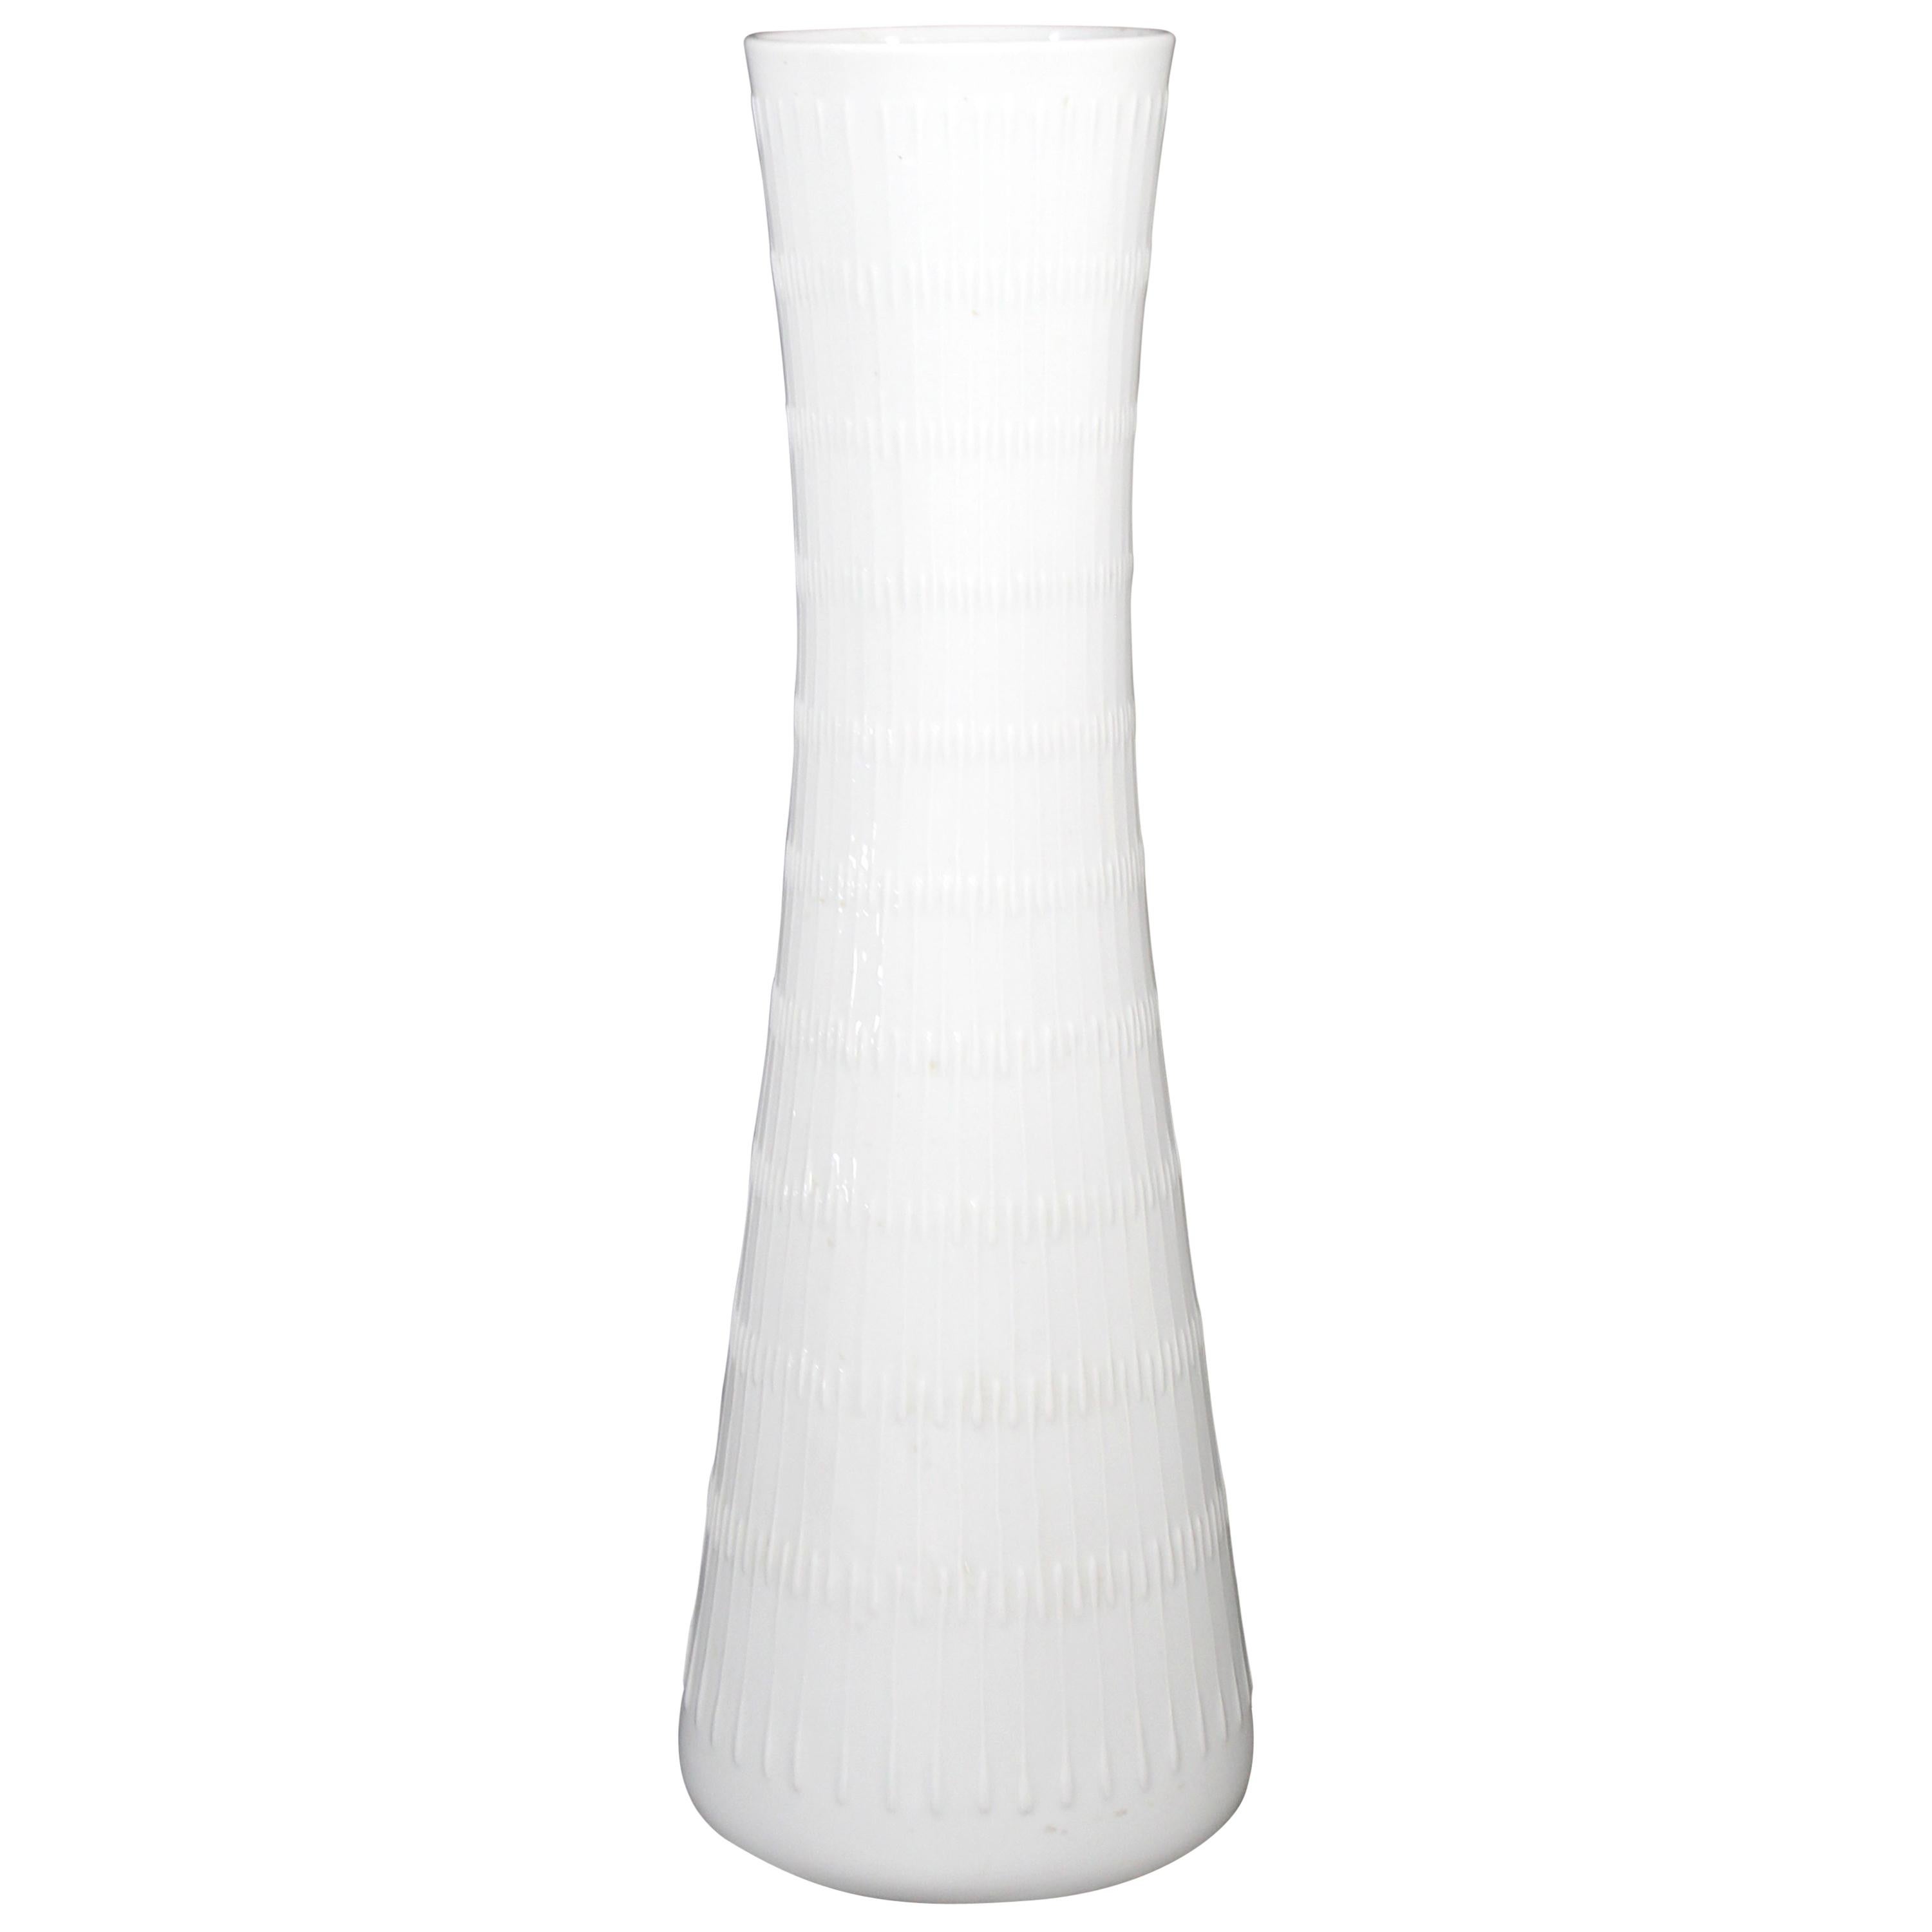 Mid-Century Modern Hutschenreuther White Porcelain Tall Vase 1970s, Germany